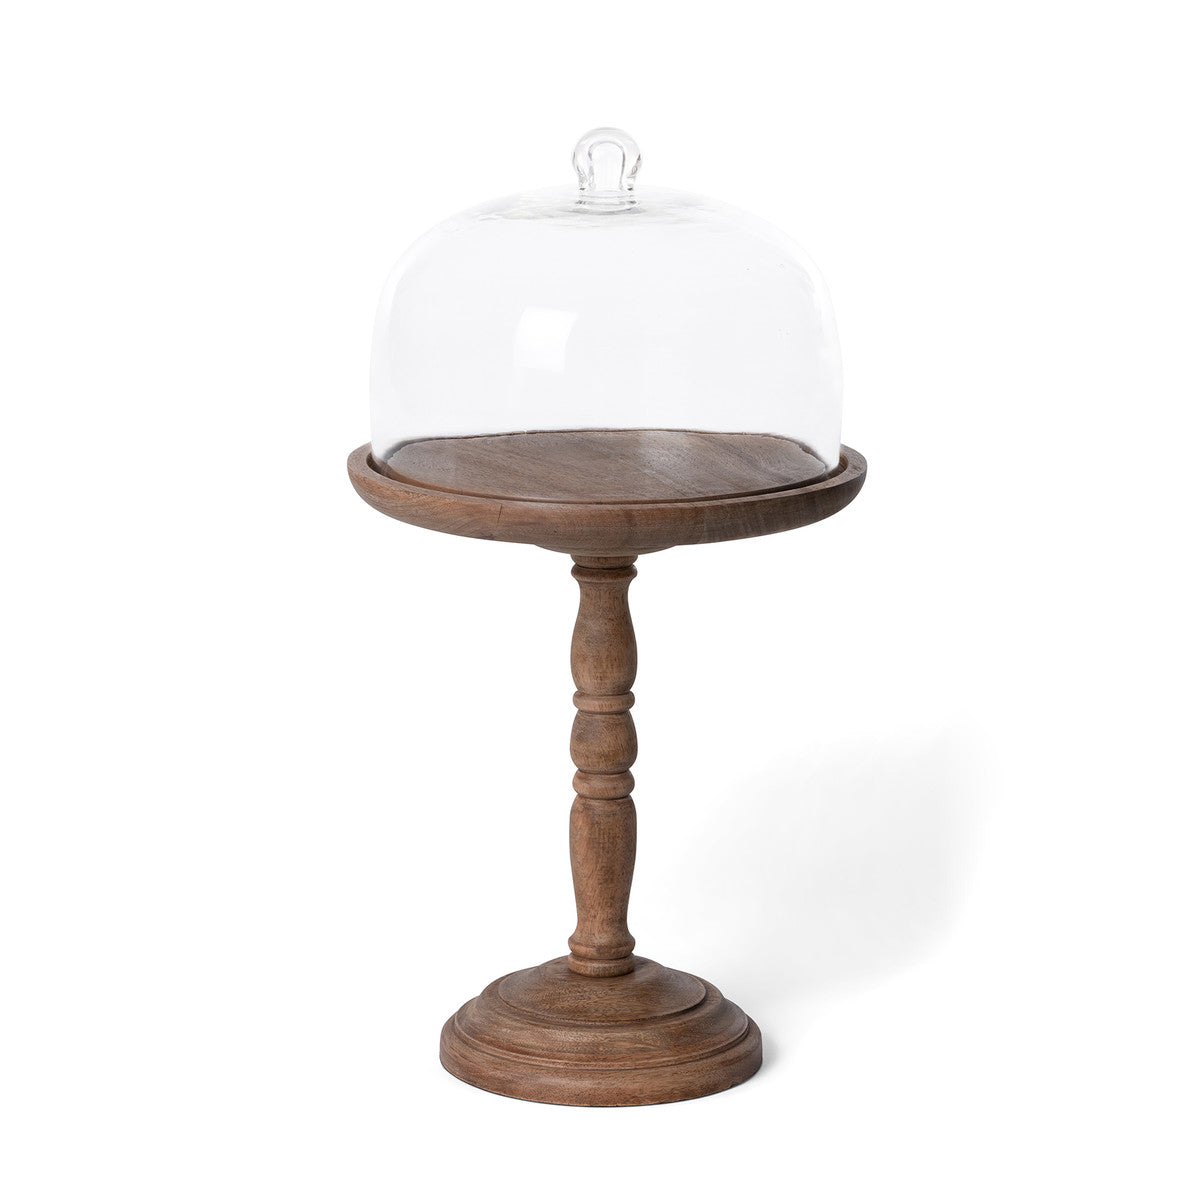 Elevated Wood Server with Glass Dome - 20"